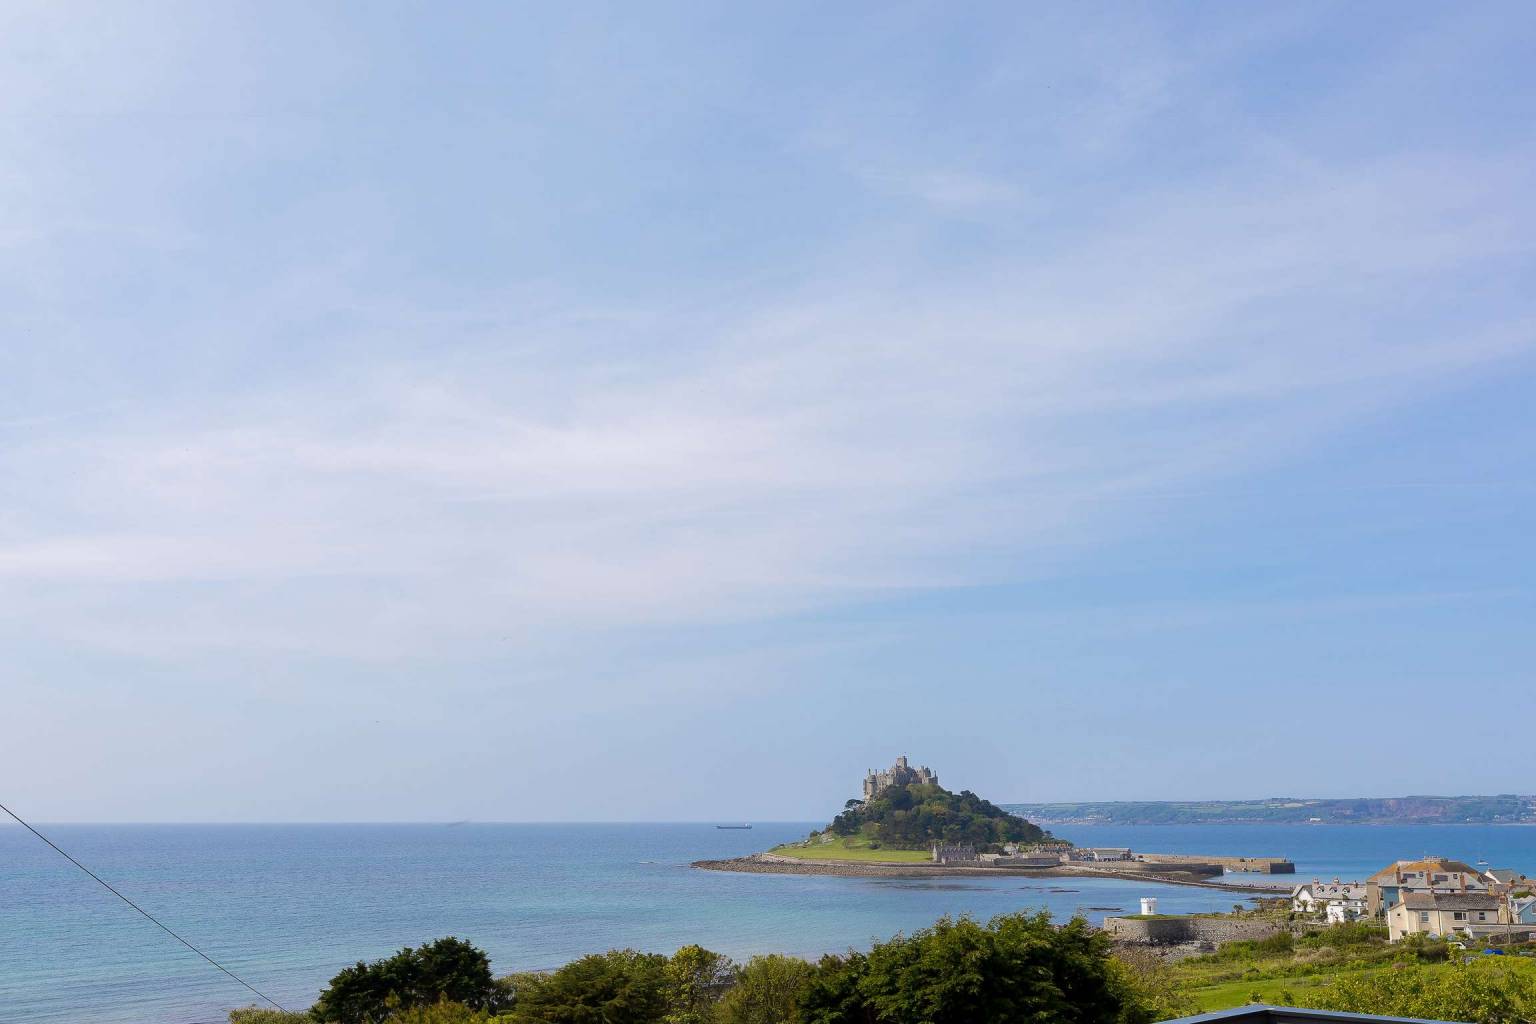 View from the doorstep, of St Michael’s Mount